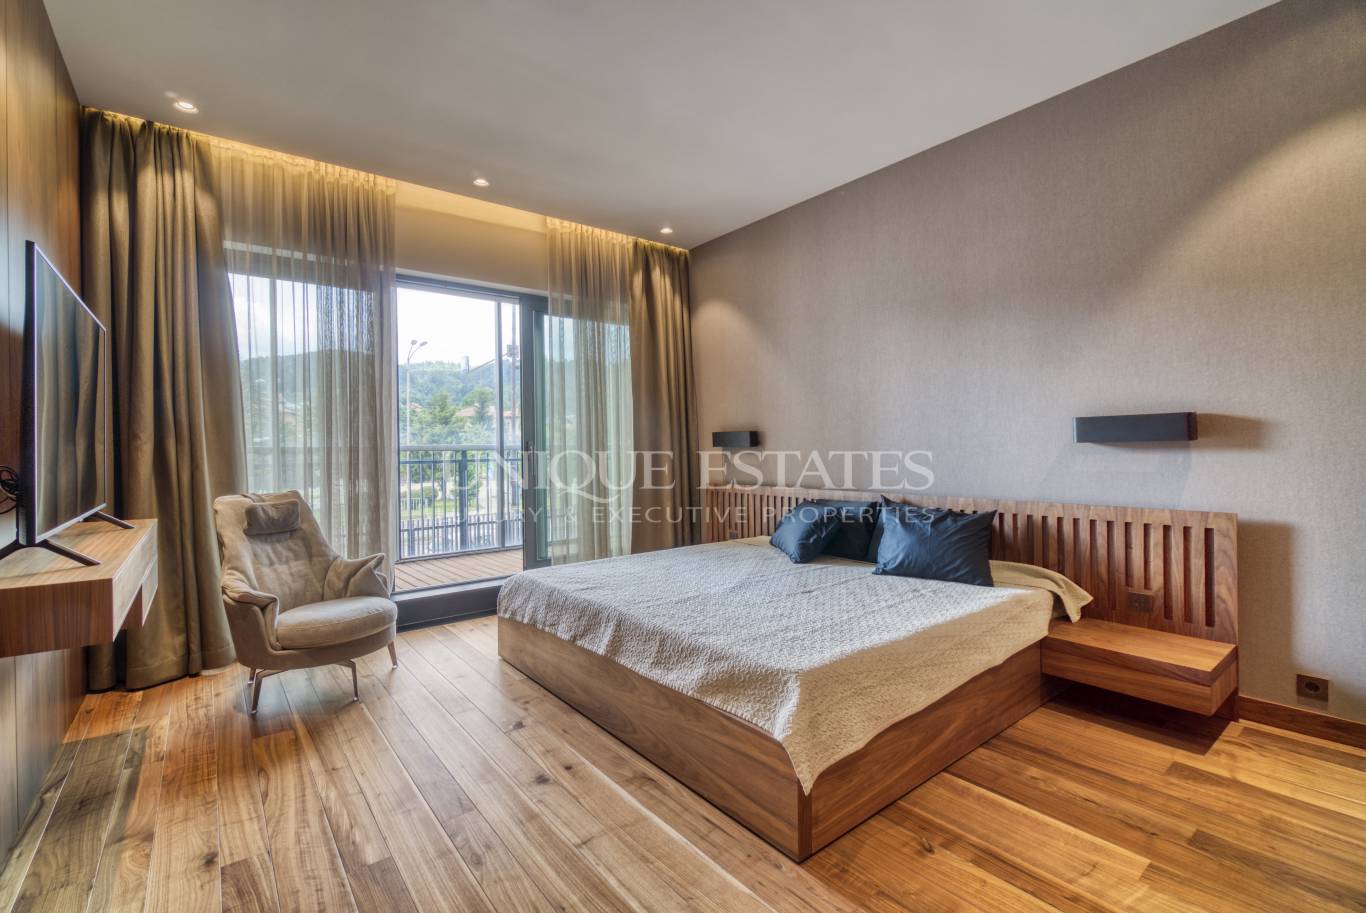 Apartment for sale in Sofia, Pancharevo with listing ID: K11671 - image 9